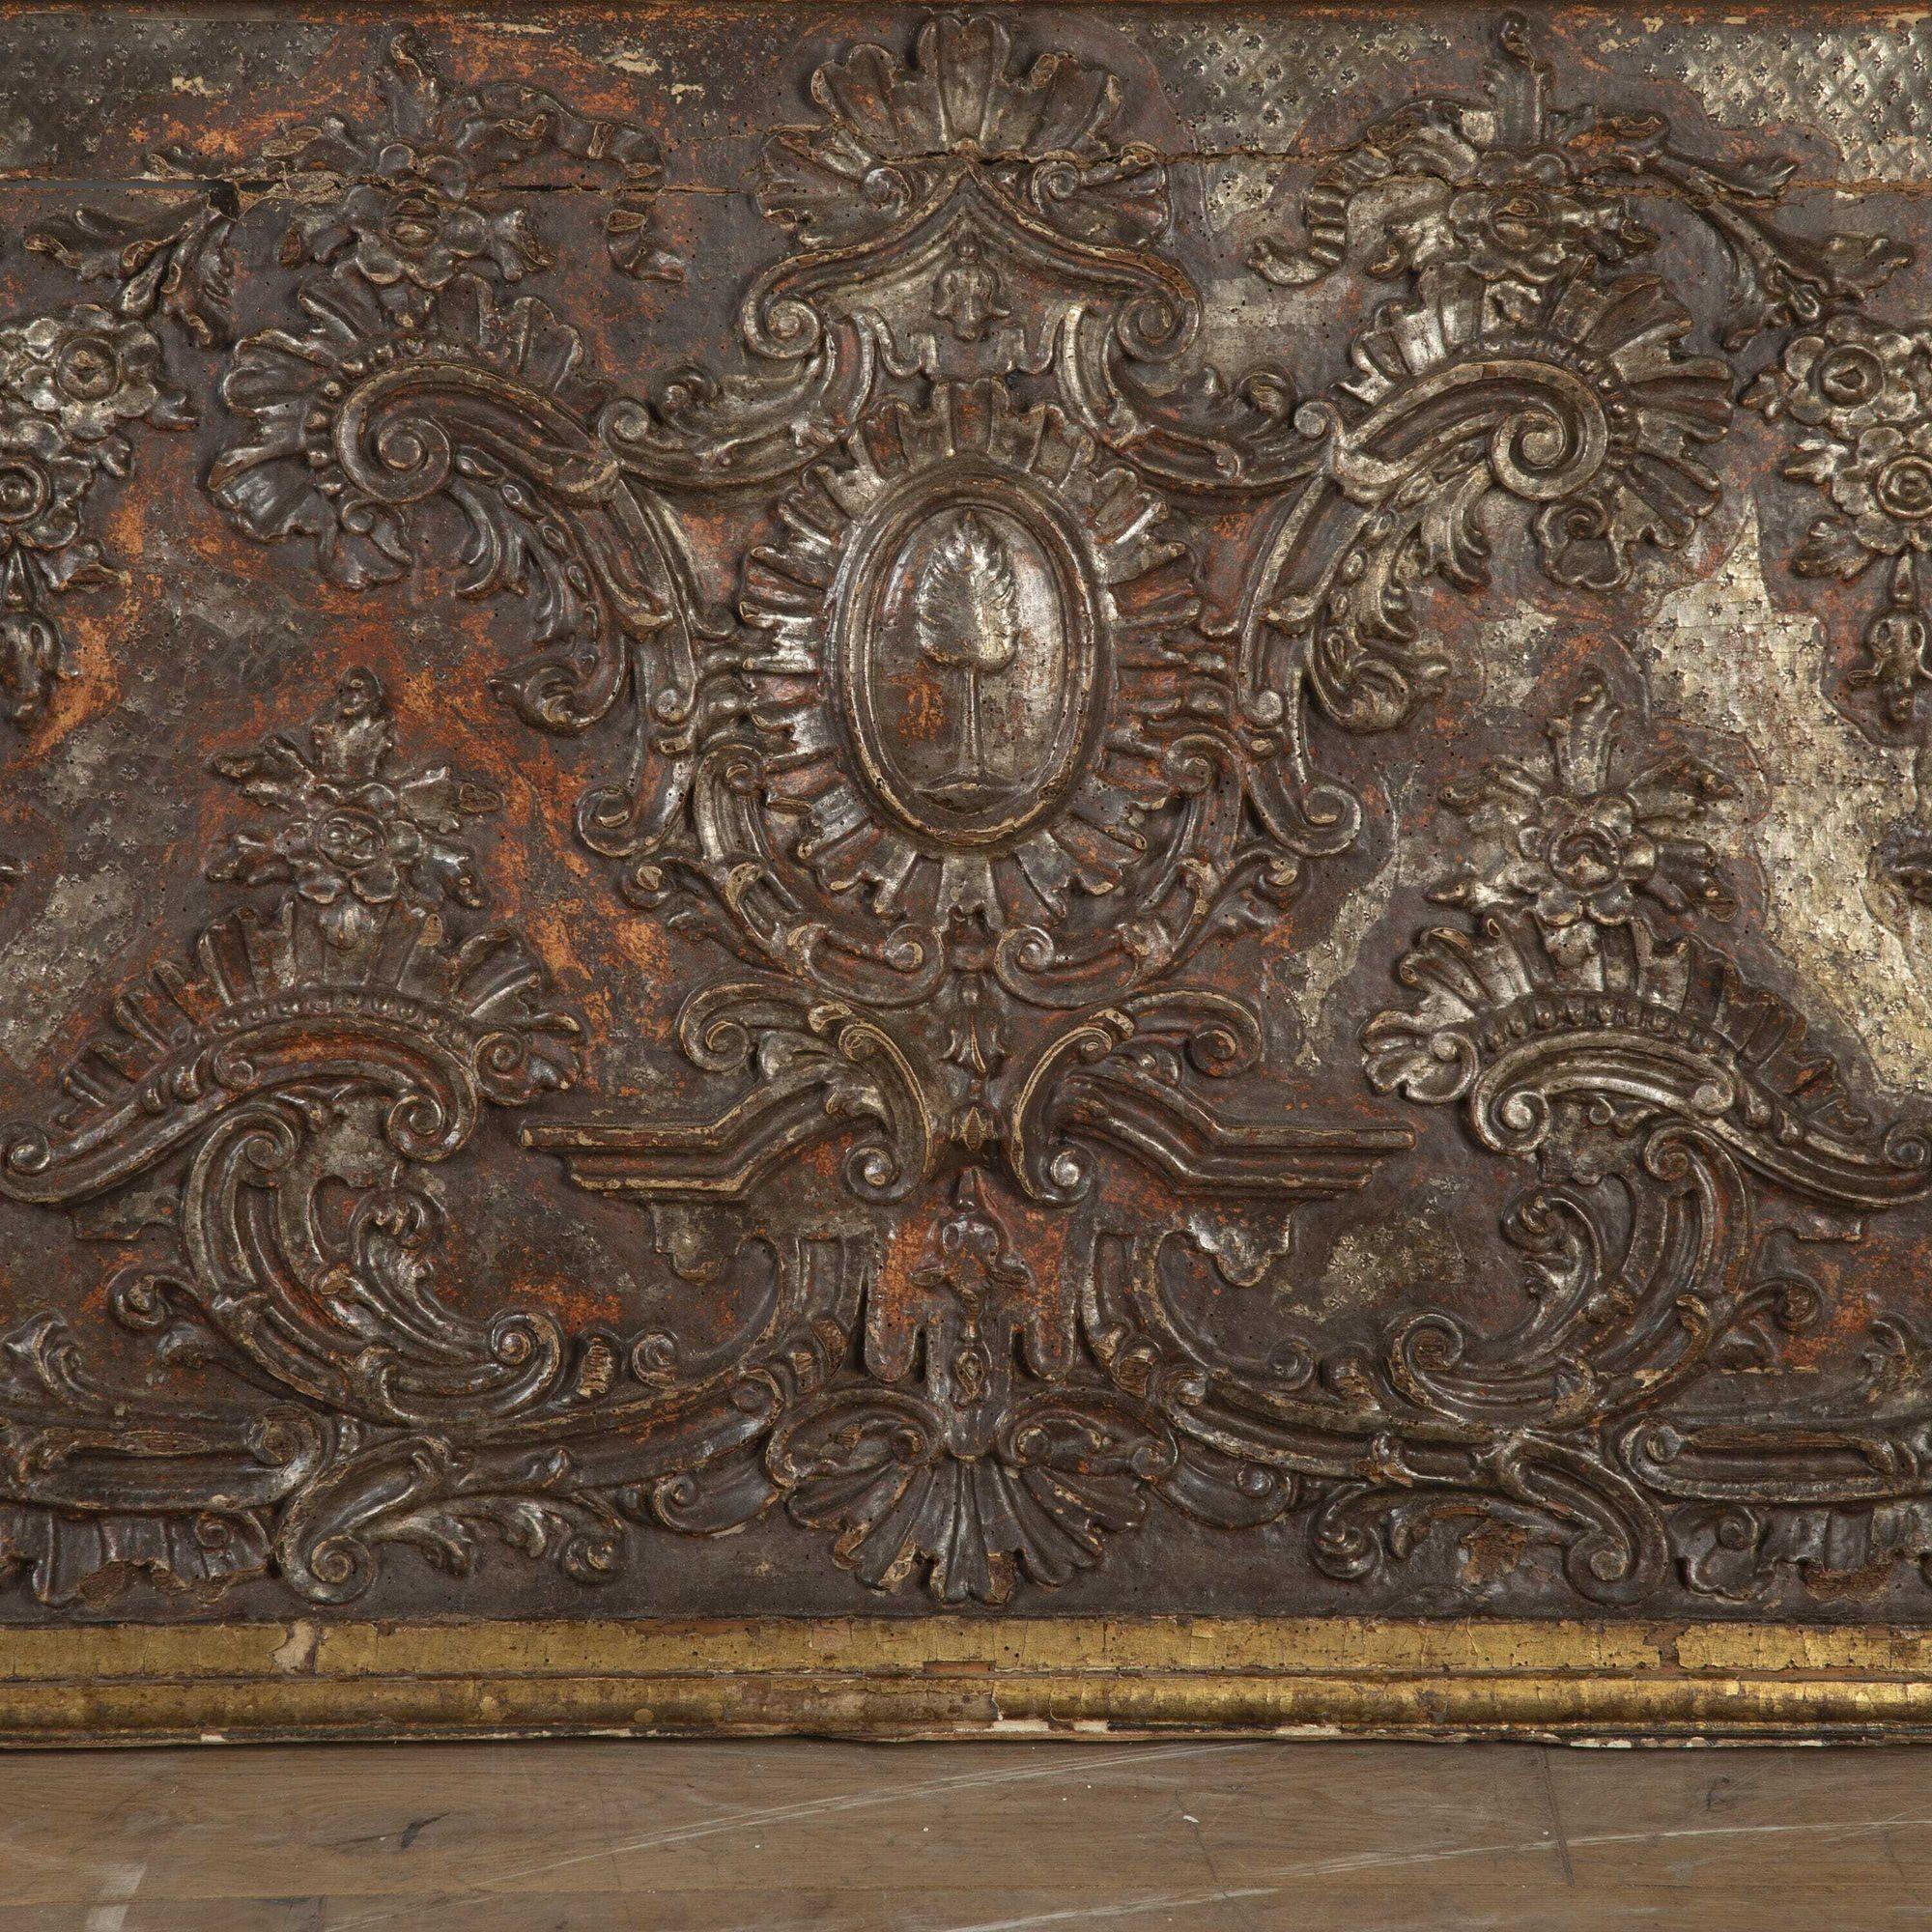 Fantastic 17th Century Spanish Alter Panel retrieved from one of the Churches in Salamanca, one of Western Spains most Ancient cities.
This panel is calved from one solid piece of wood including the patterned gilded frame.
Skilful craftsmanship